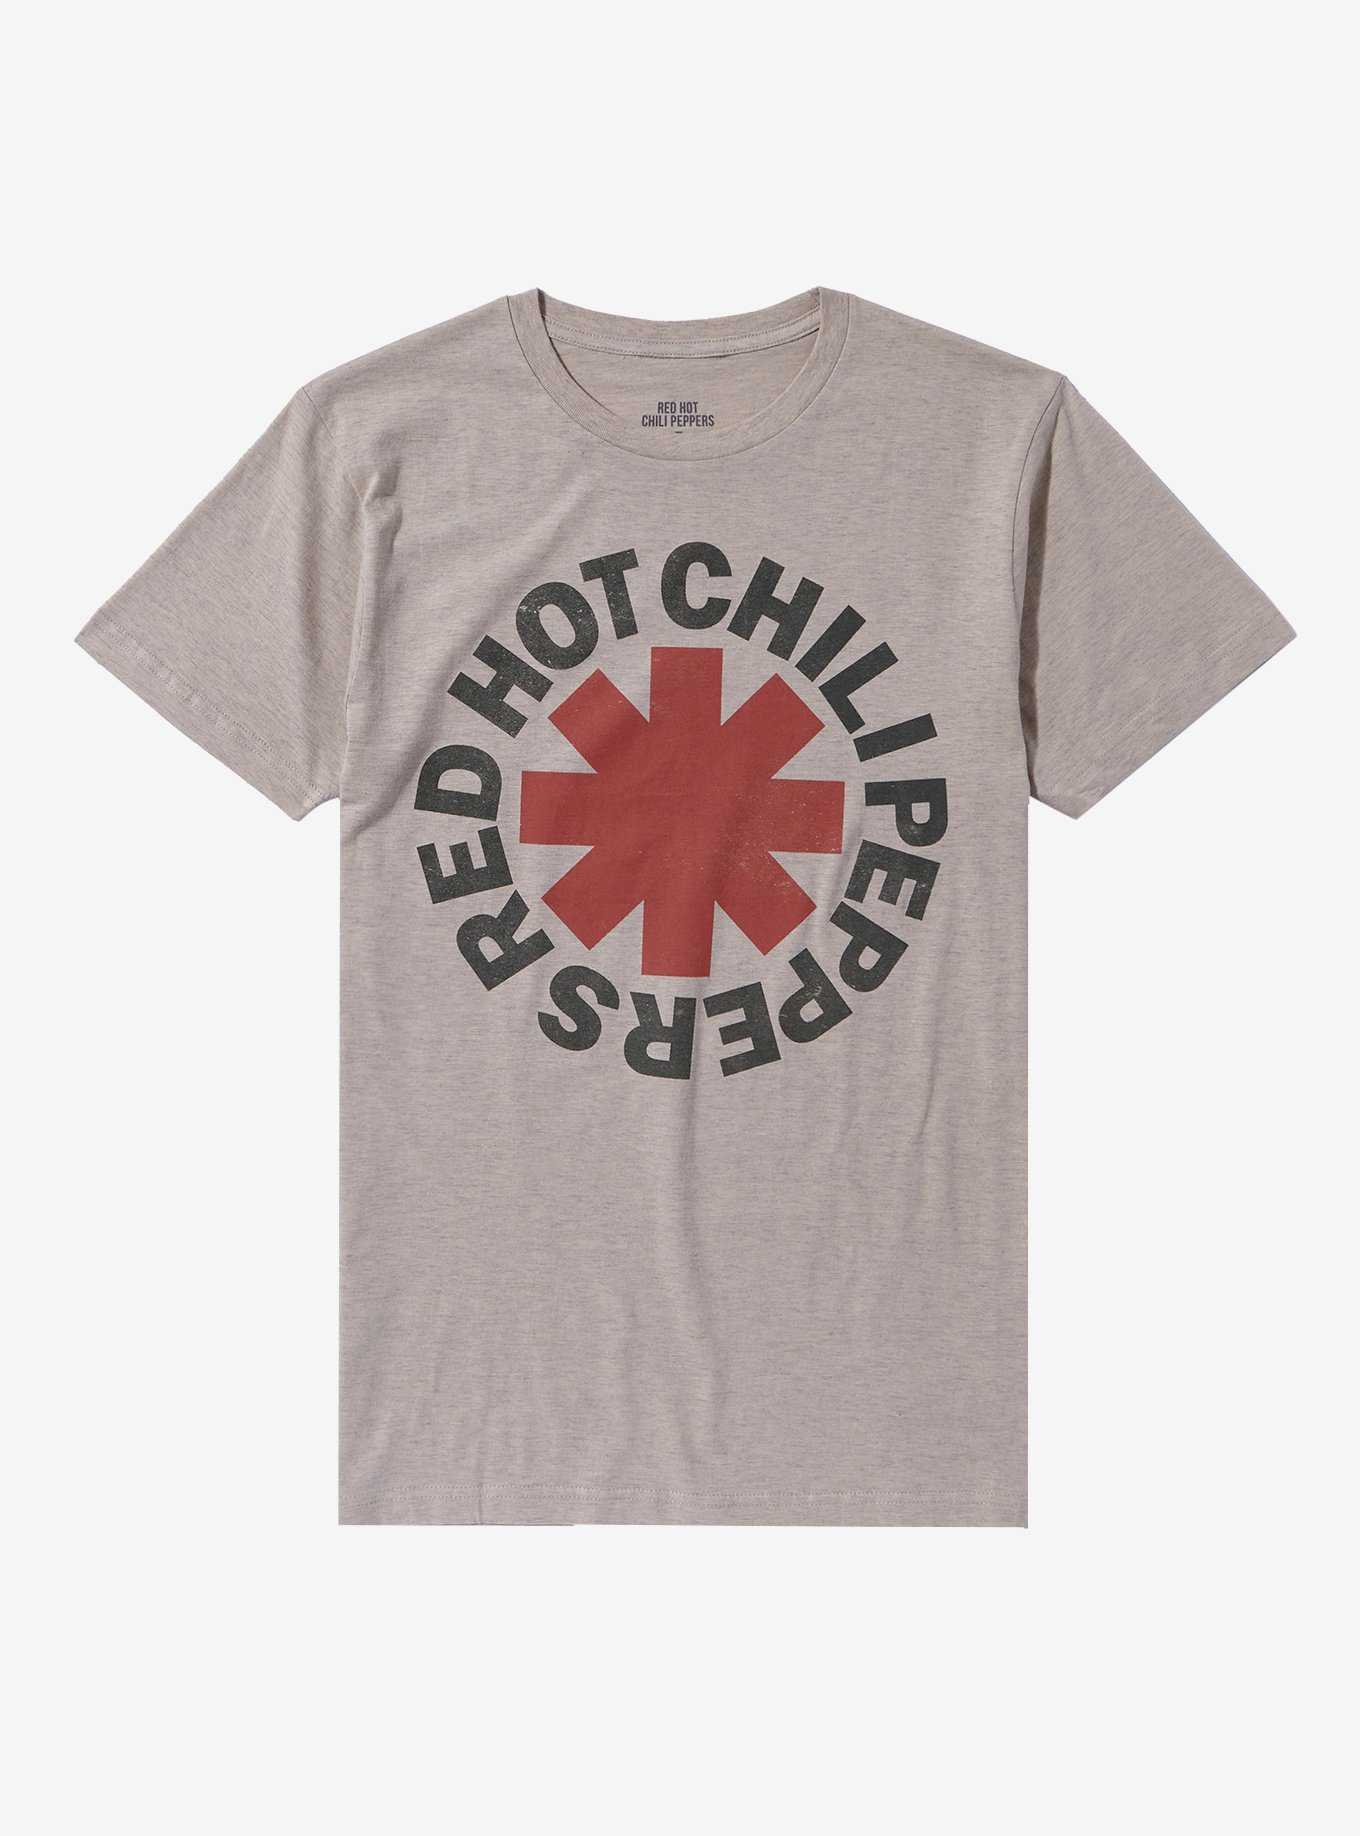 Red Hot Chili Peppers Logo Heather Oatmeal Boyfriend Fit Girls T-Shirt, , hi-res